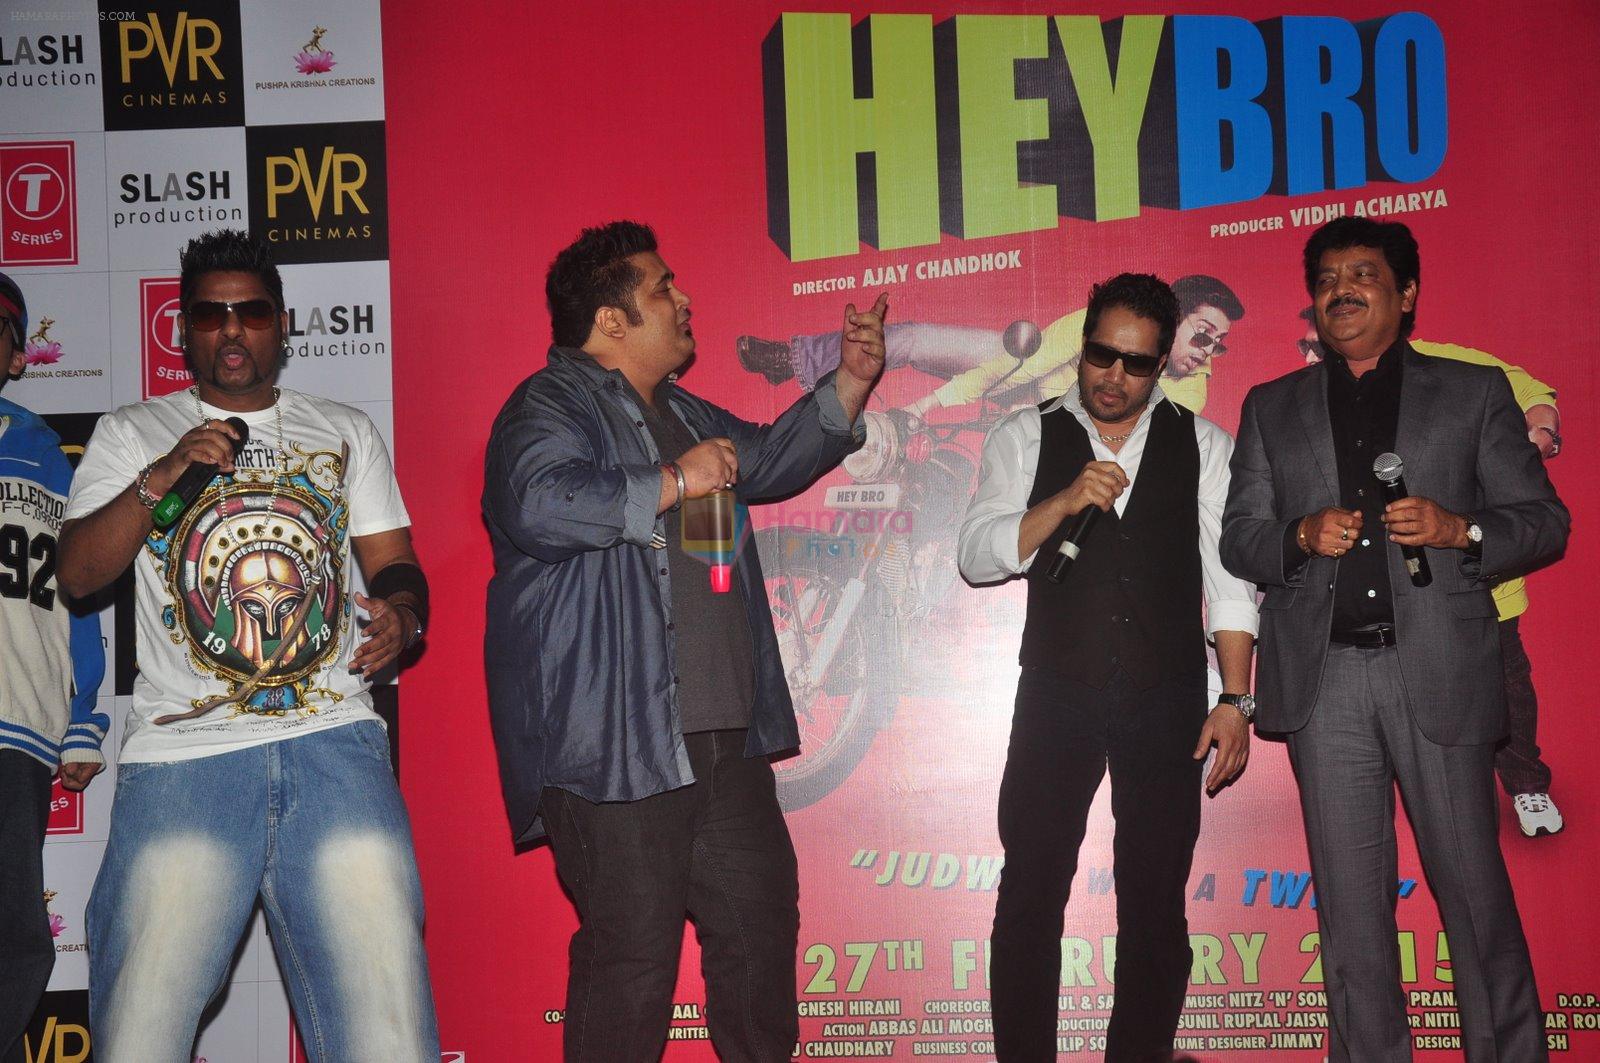 Mika Singh, Udit Narayan at Hey Bro launch in PVR on 15th Jan 2015